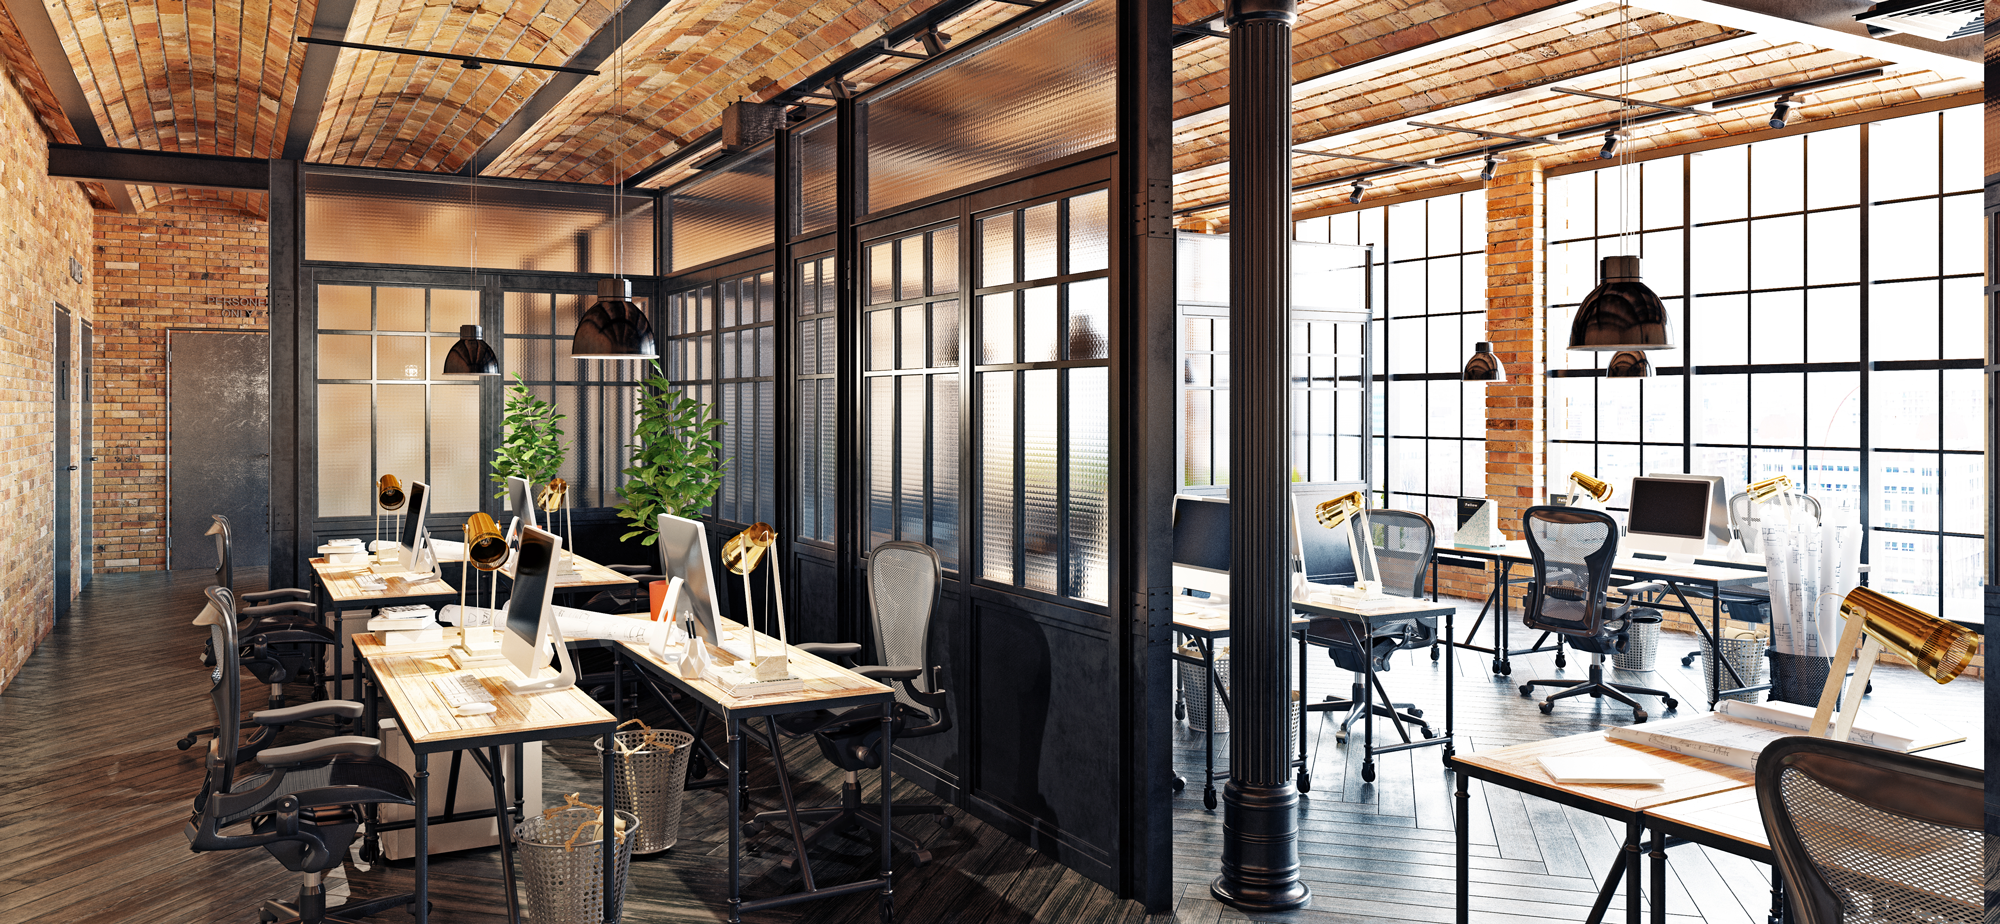 How to Create a Modern Industrial Office Design